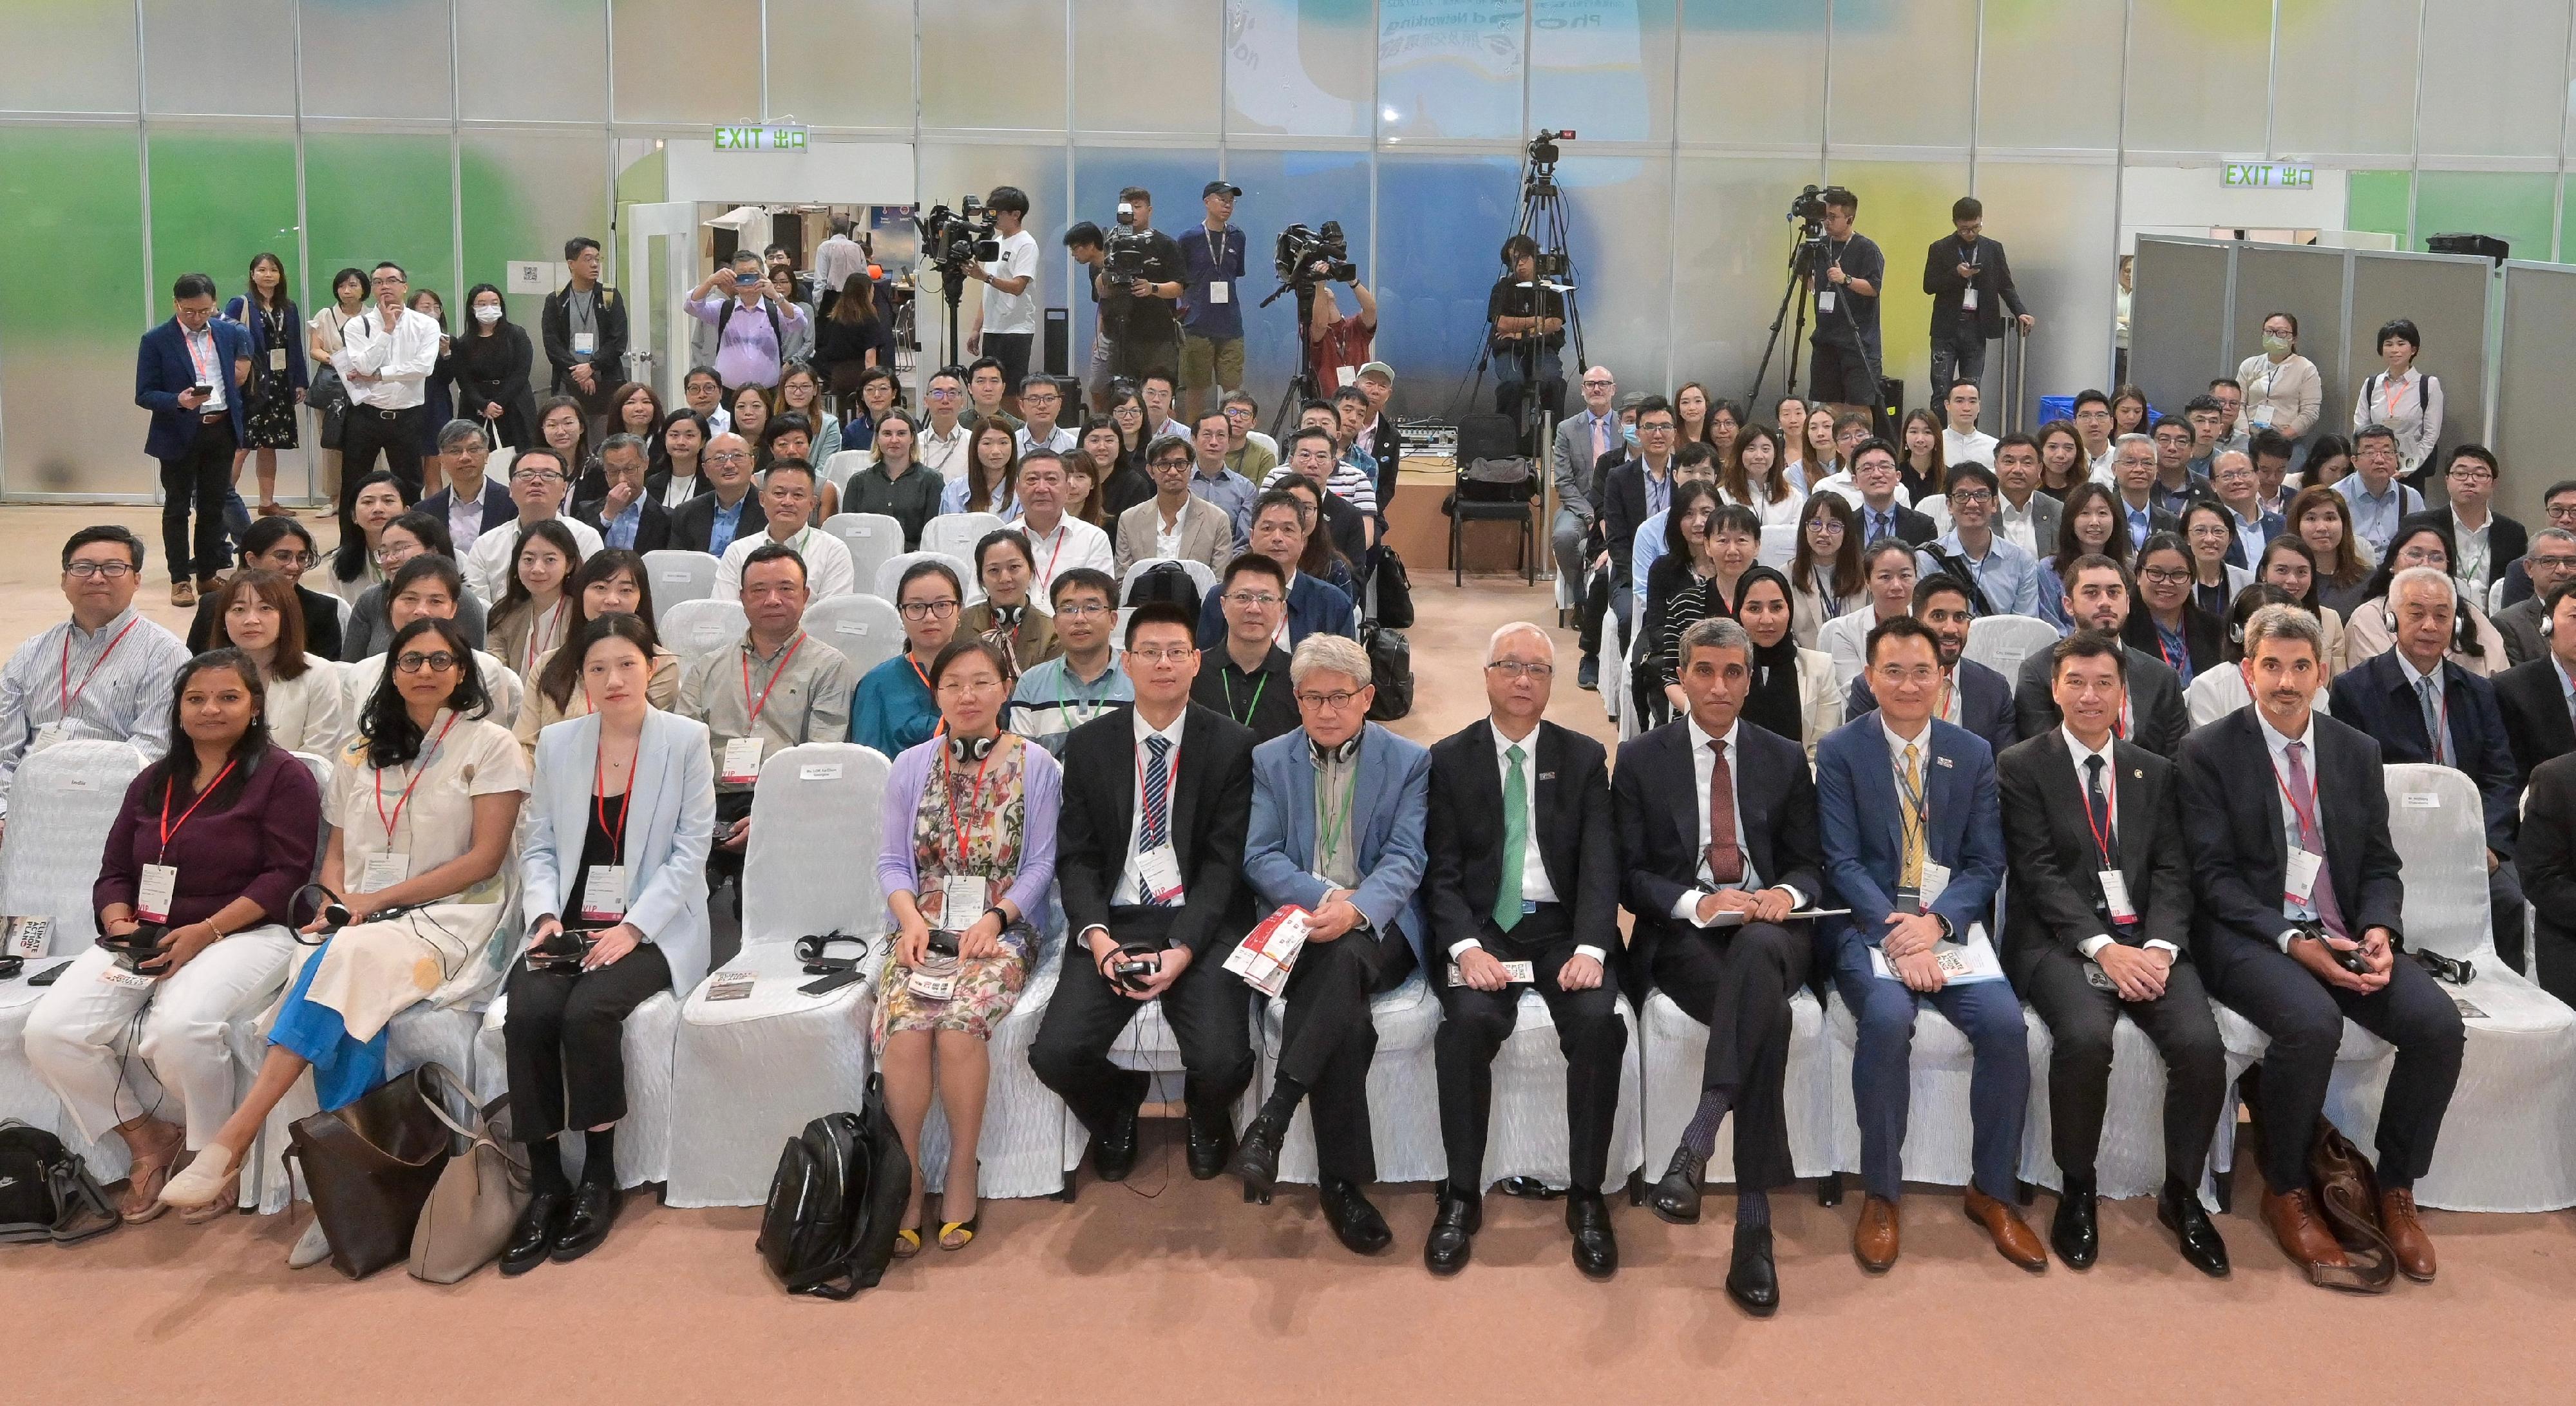 The C40 Climate Action Seminar (Asian and Oceania Regions) was held today (October 27) at the AsiaWorld-Expo. Over 140 participants from 15 cities attended C40 Climate Action Seminar in Hong Kong.